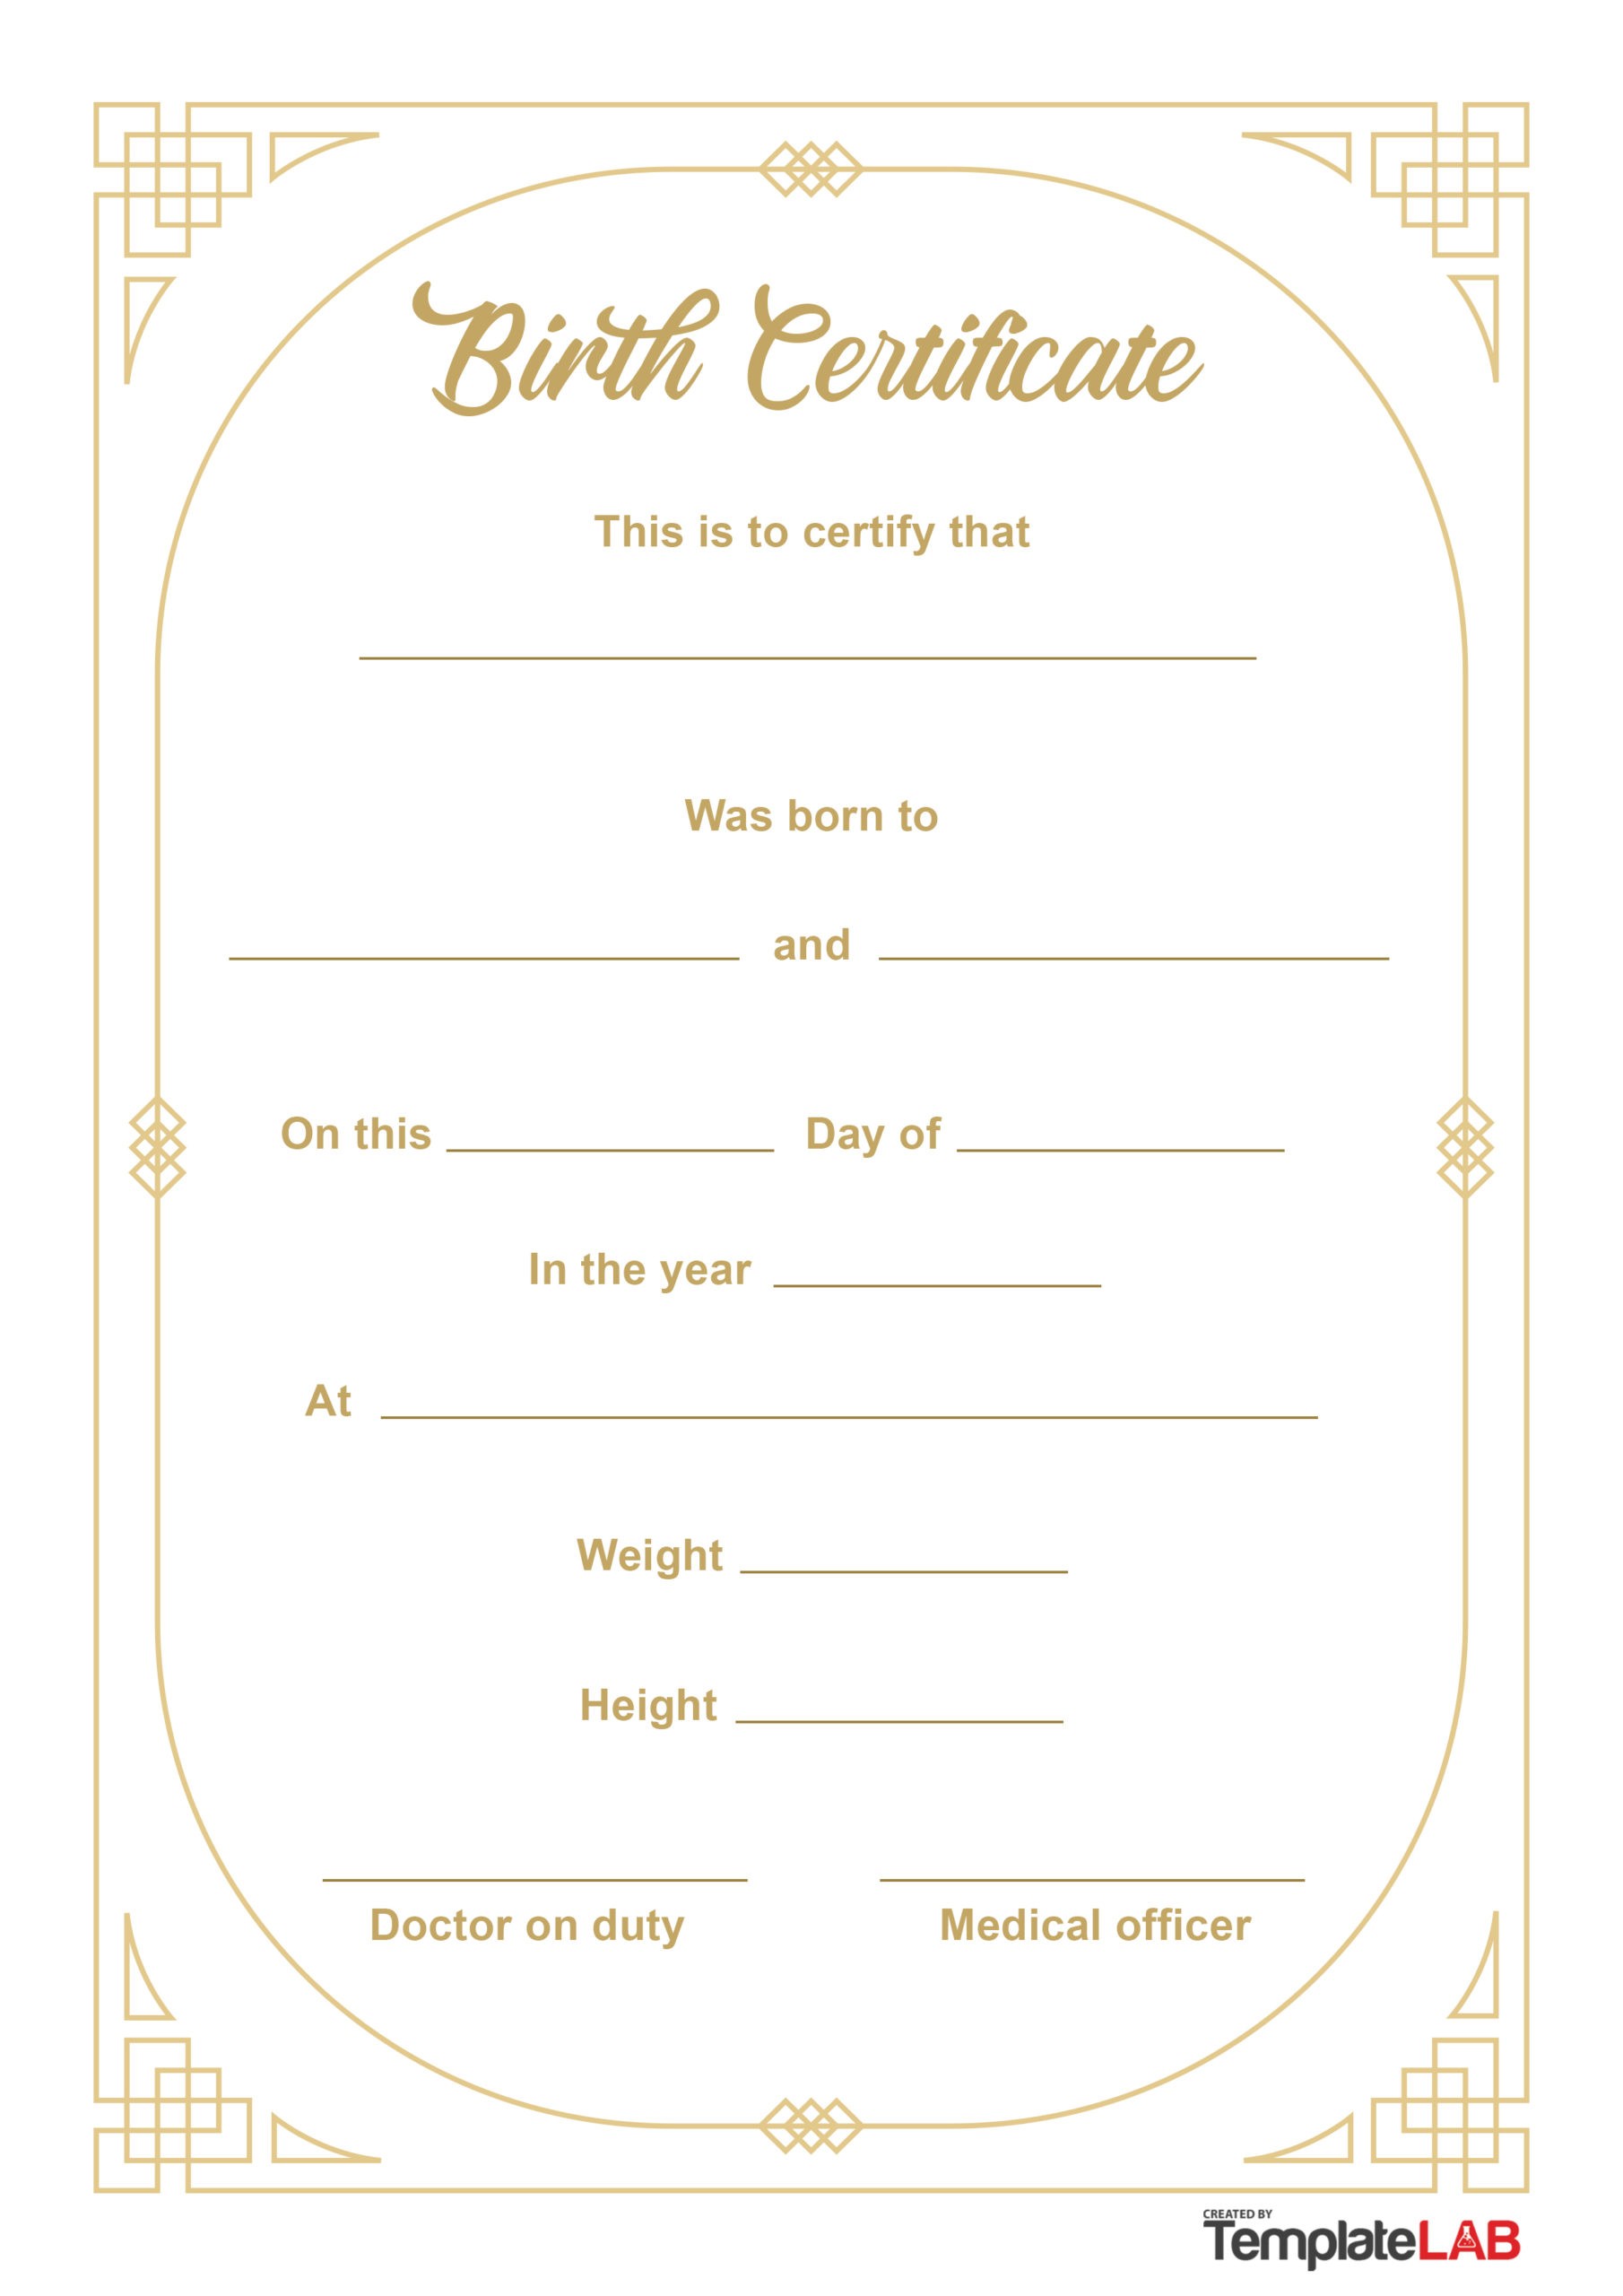 22 Birth Certificate Templates Word Pdf ᐅ Templatelab Pertaining To Novelty Birth Certificate Template